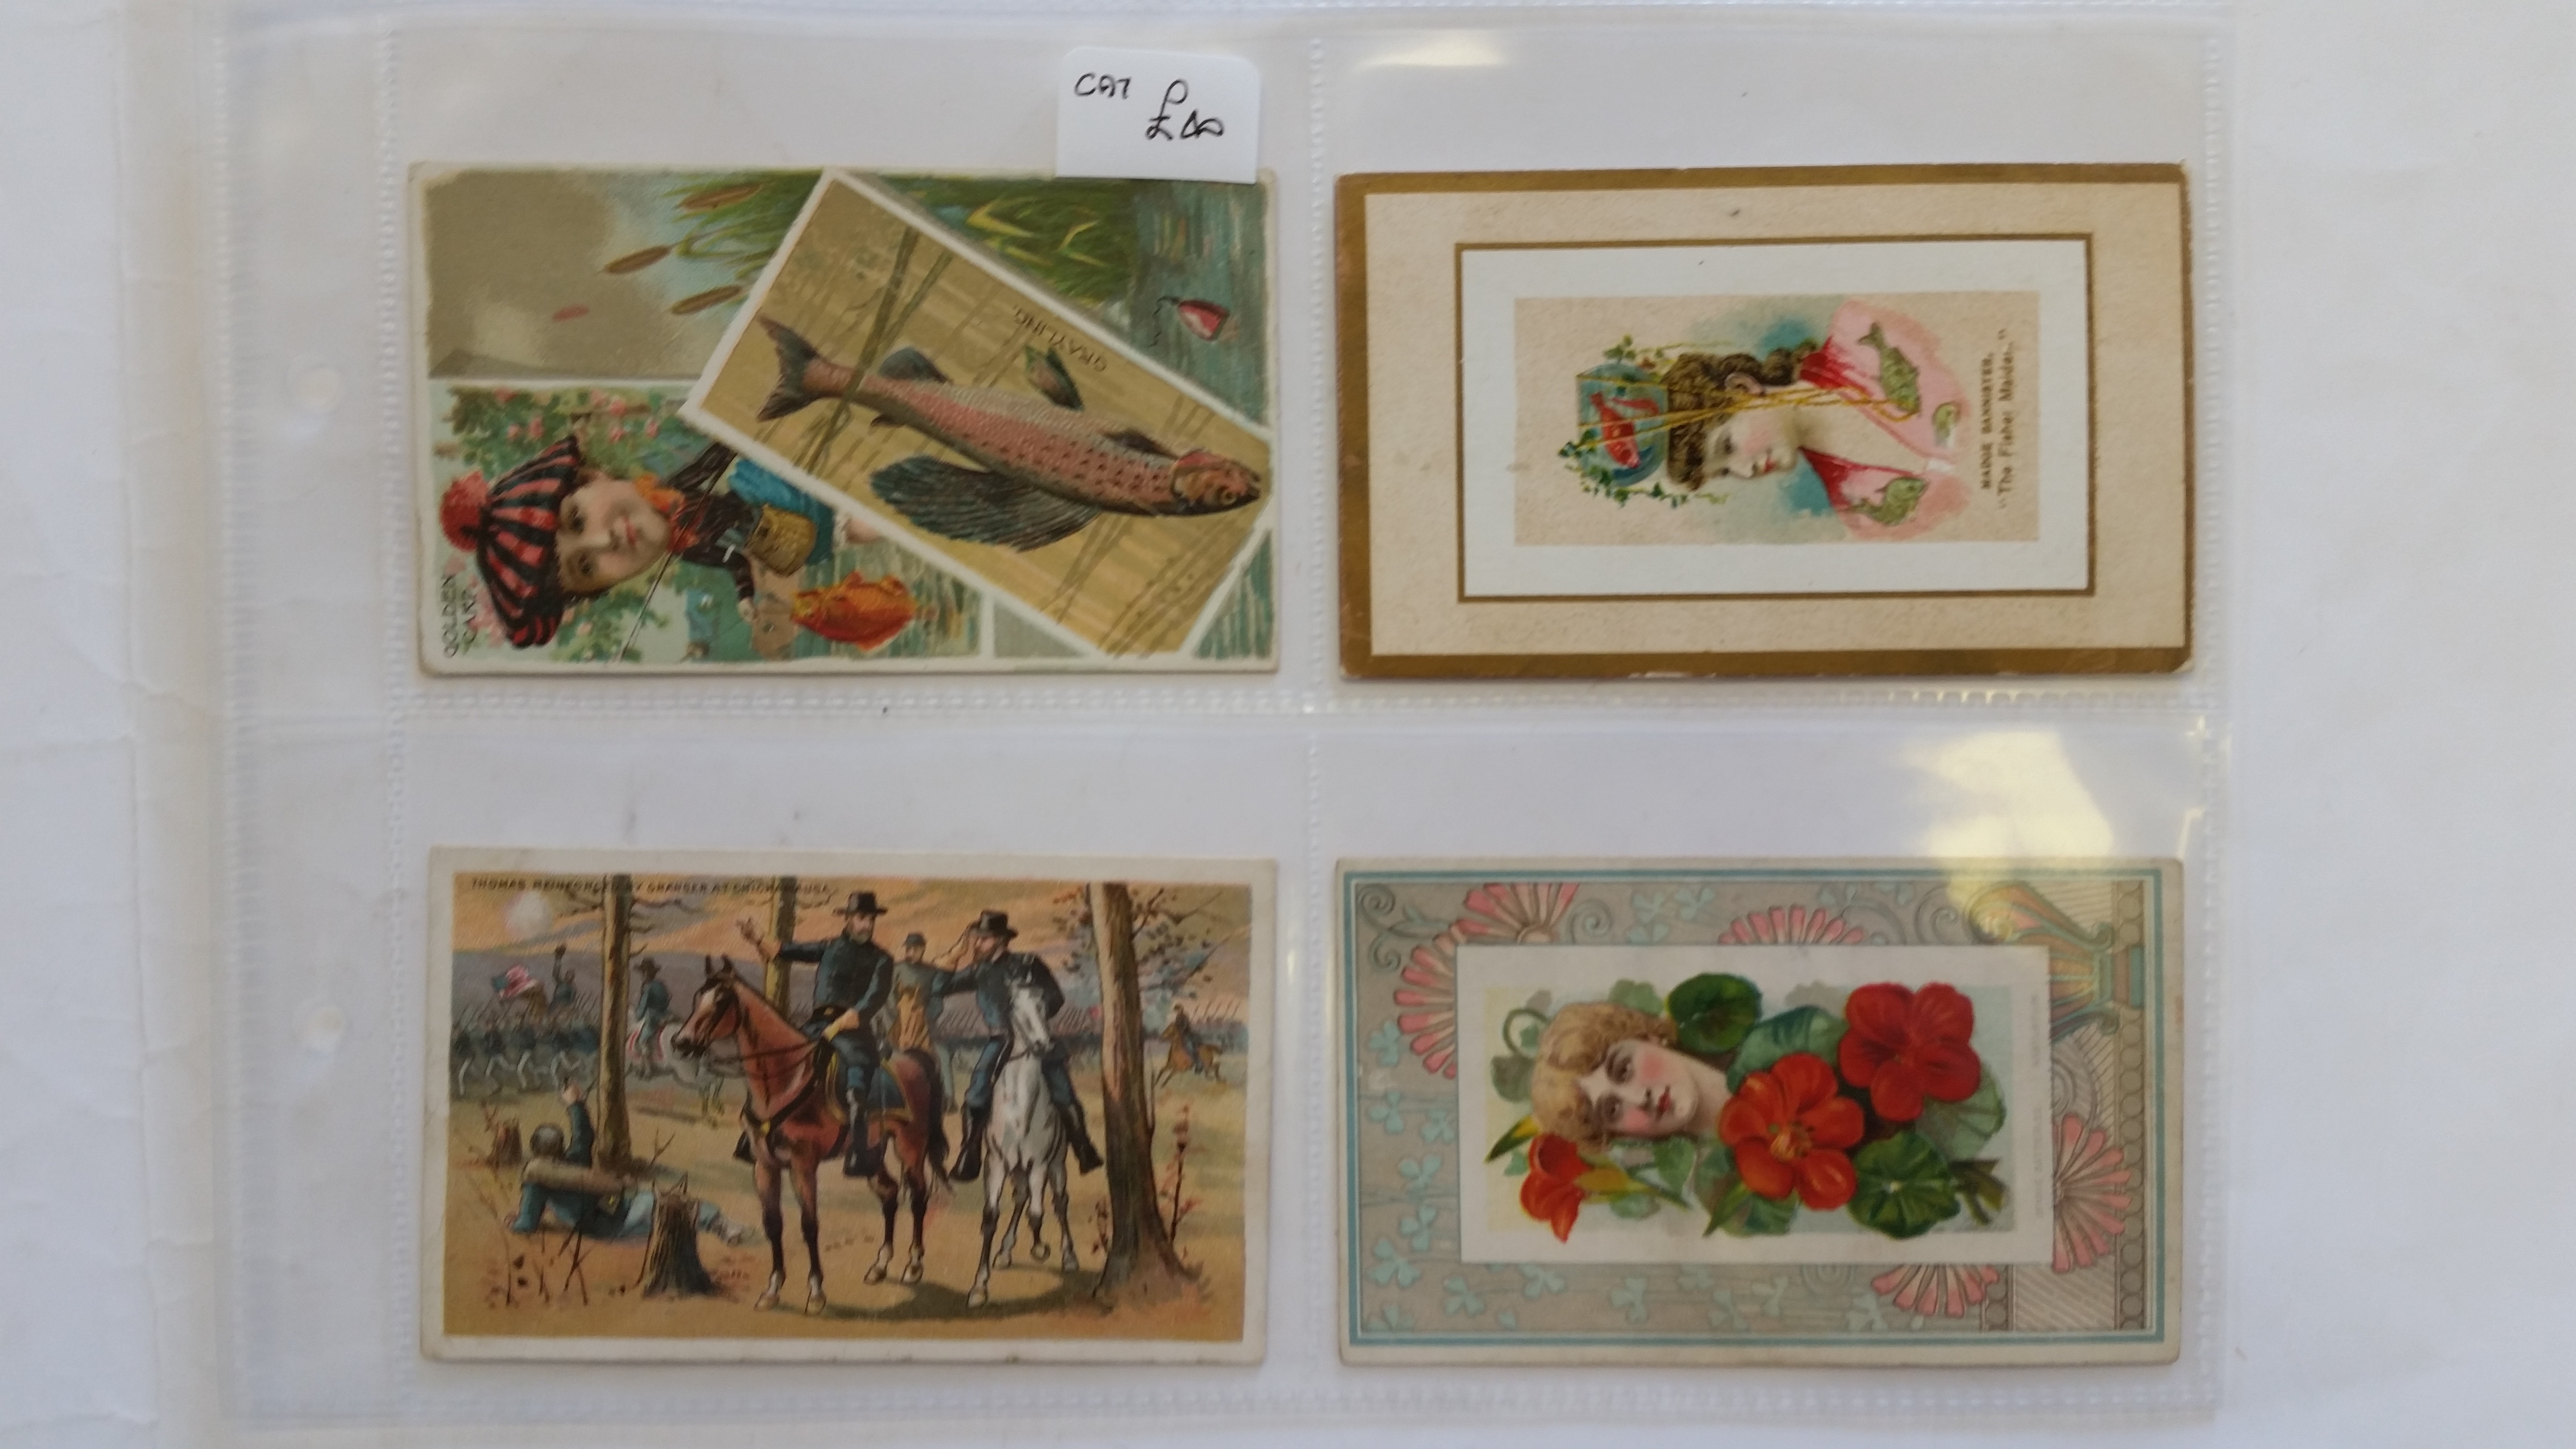 DUKE, extra-large odds, Fishes & Fishing, Battle Scenes, Fairest Flowers, Fancy Dress, G to VG, 4 - Image 2 of 3